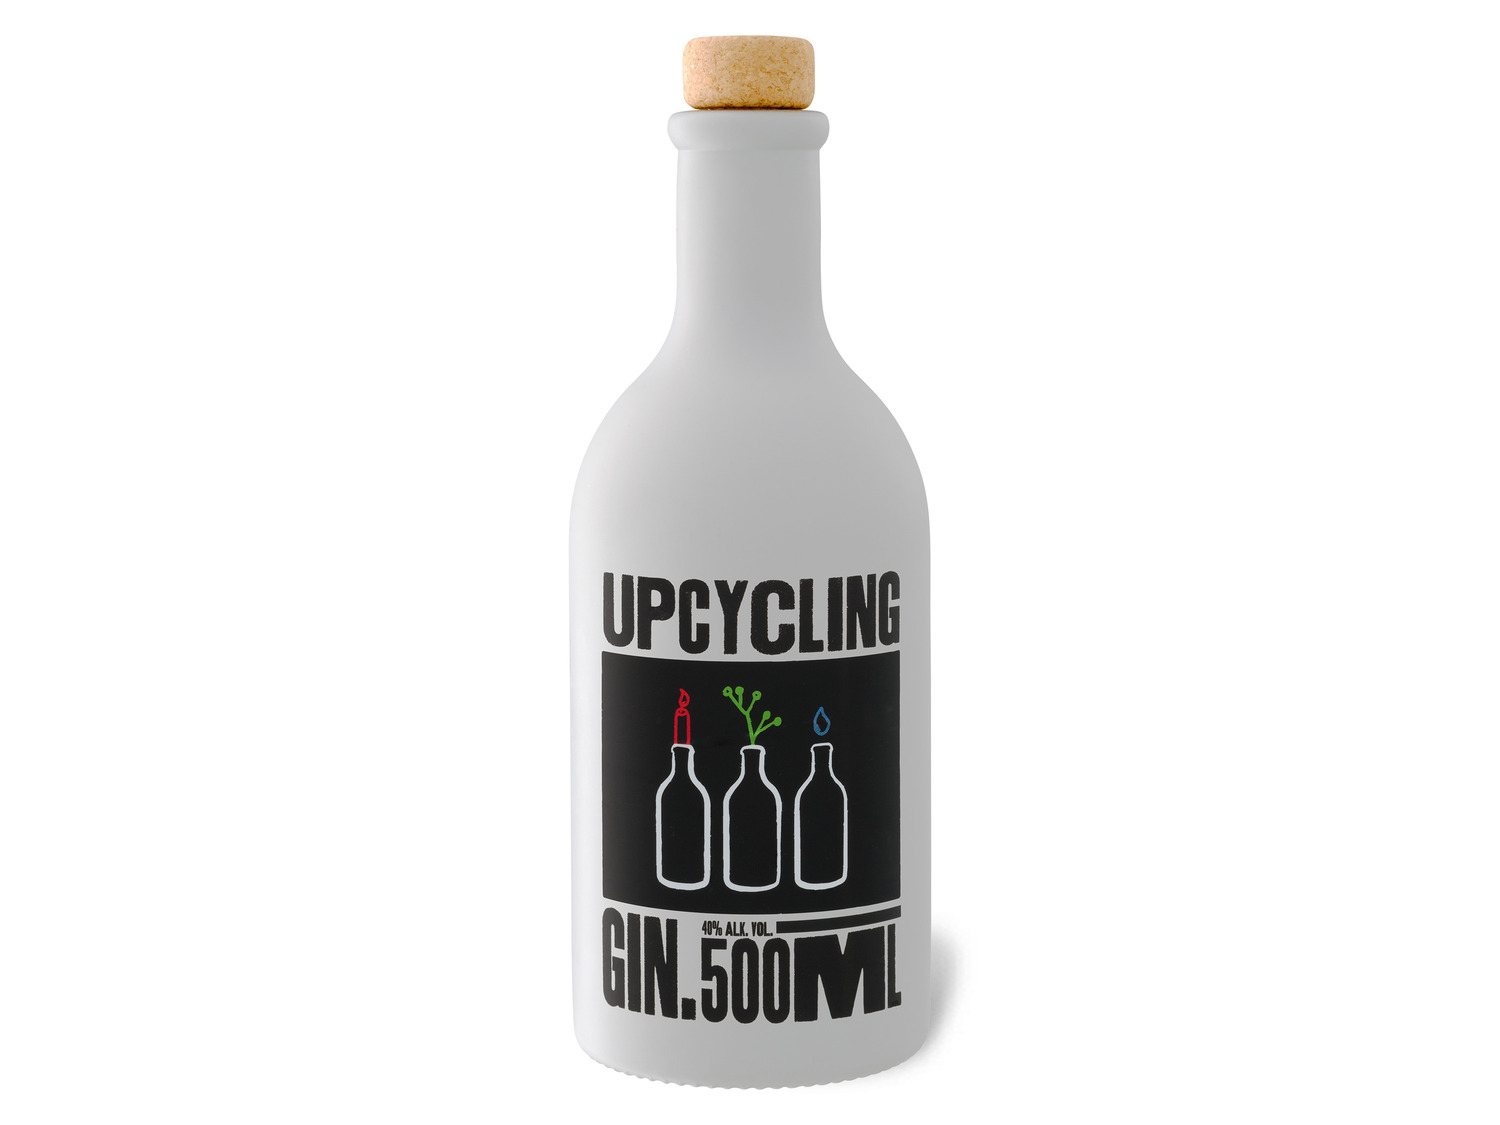 Upcycling Gin 40% Vol kaufen | online LIDL